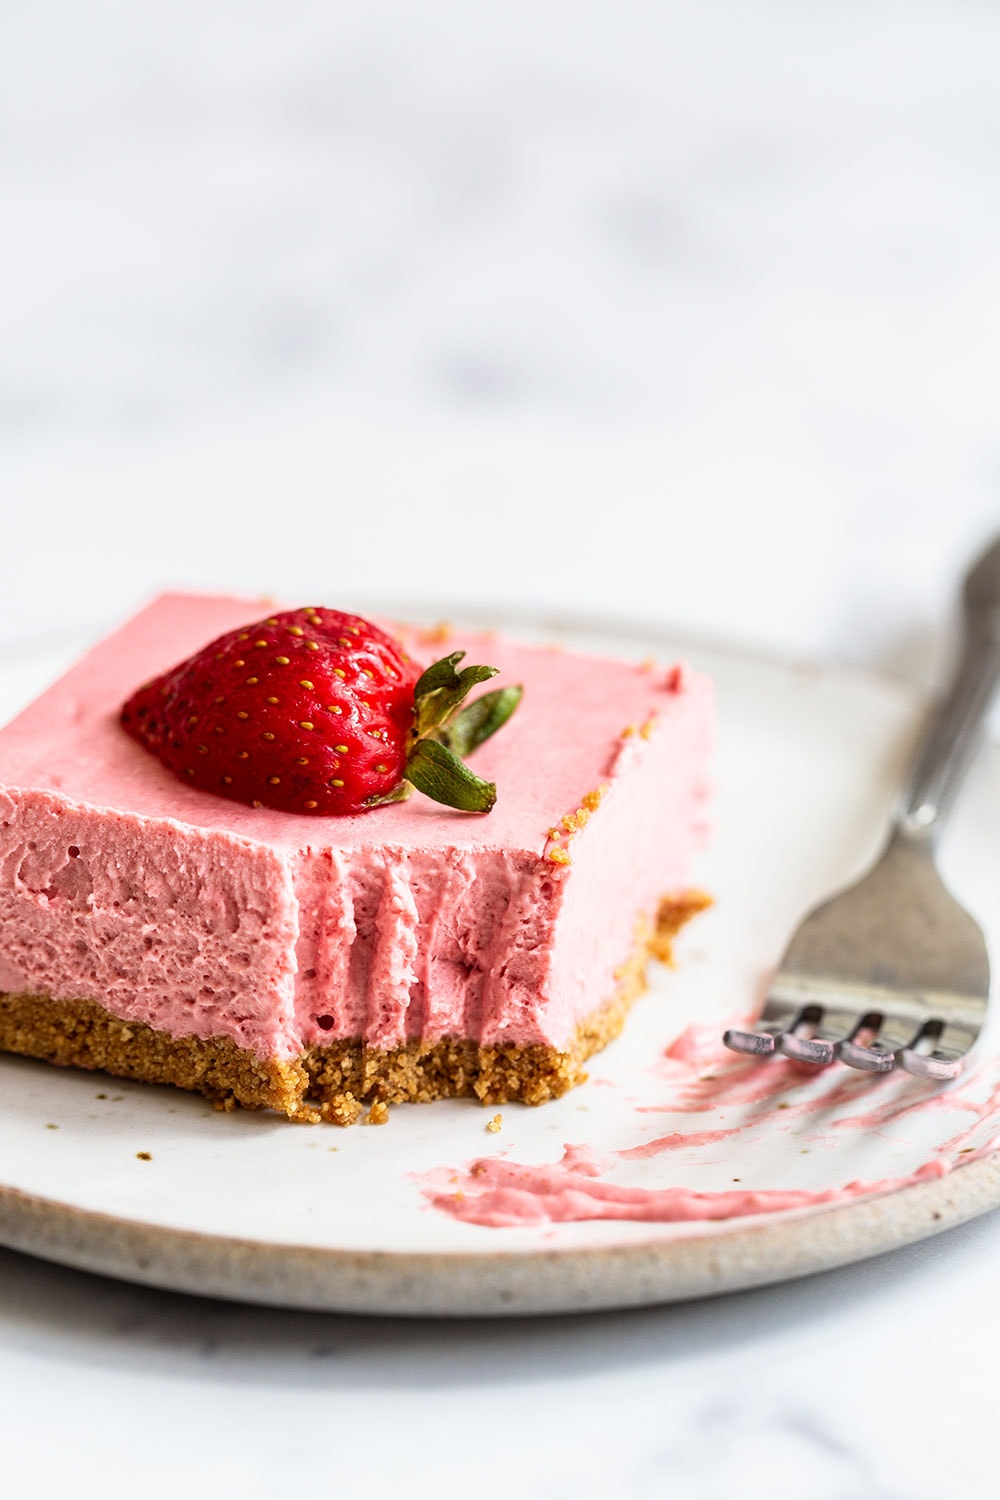 Homemade no bake strawberry cheesecake bar on a plate with a sliced strawberry on top